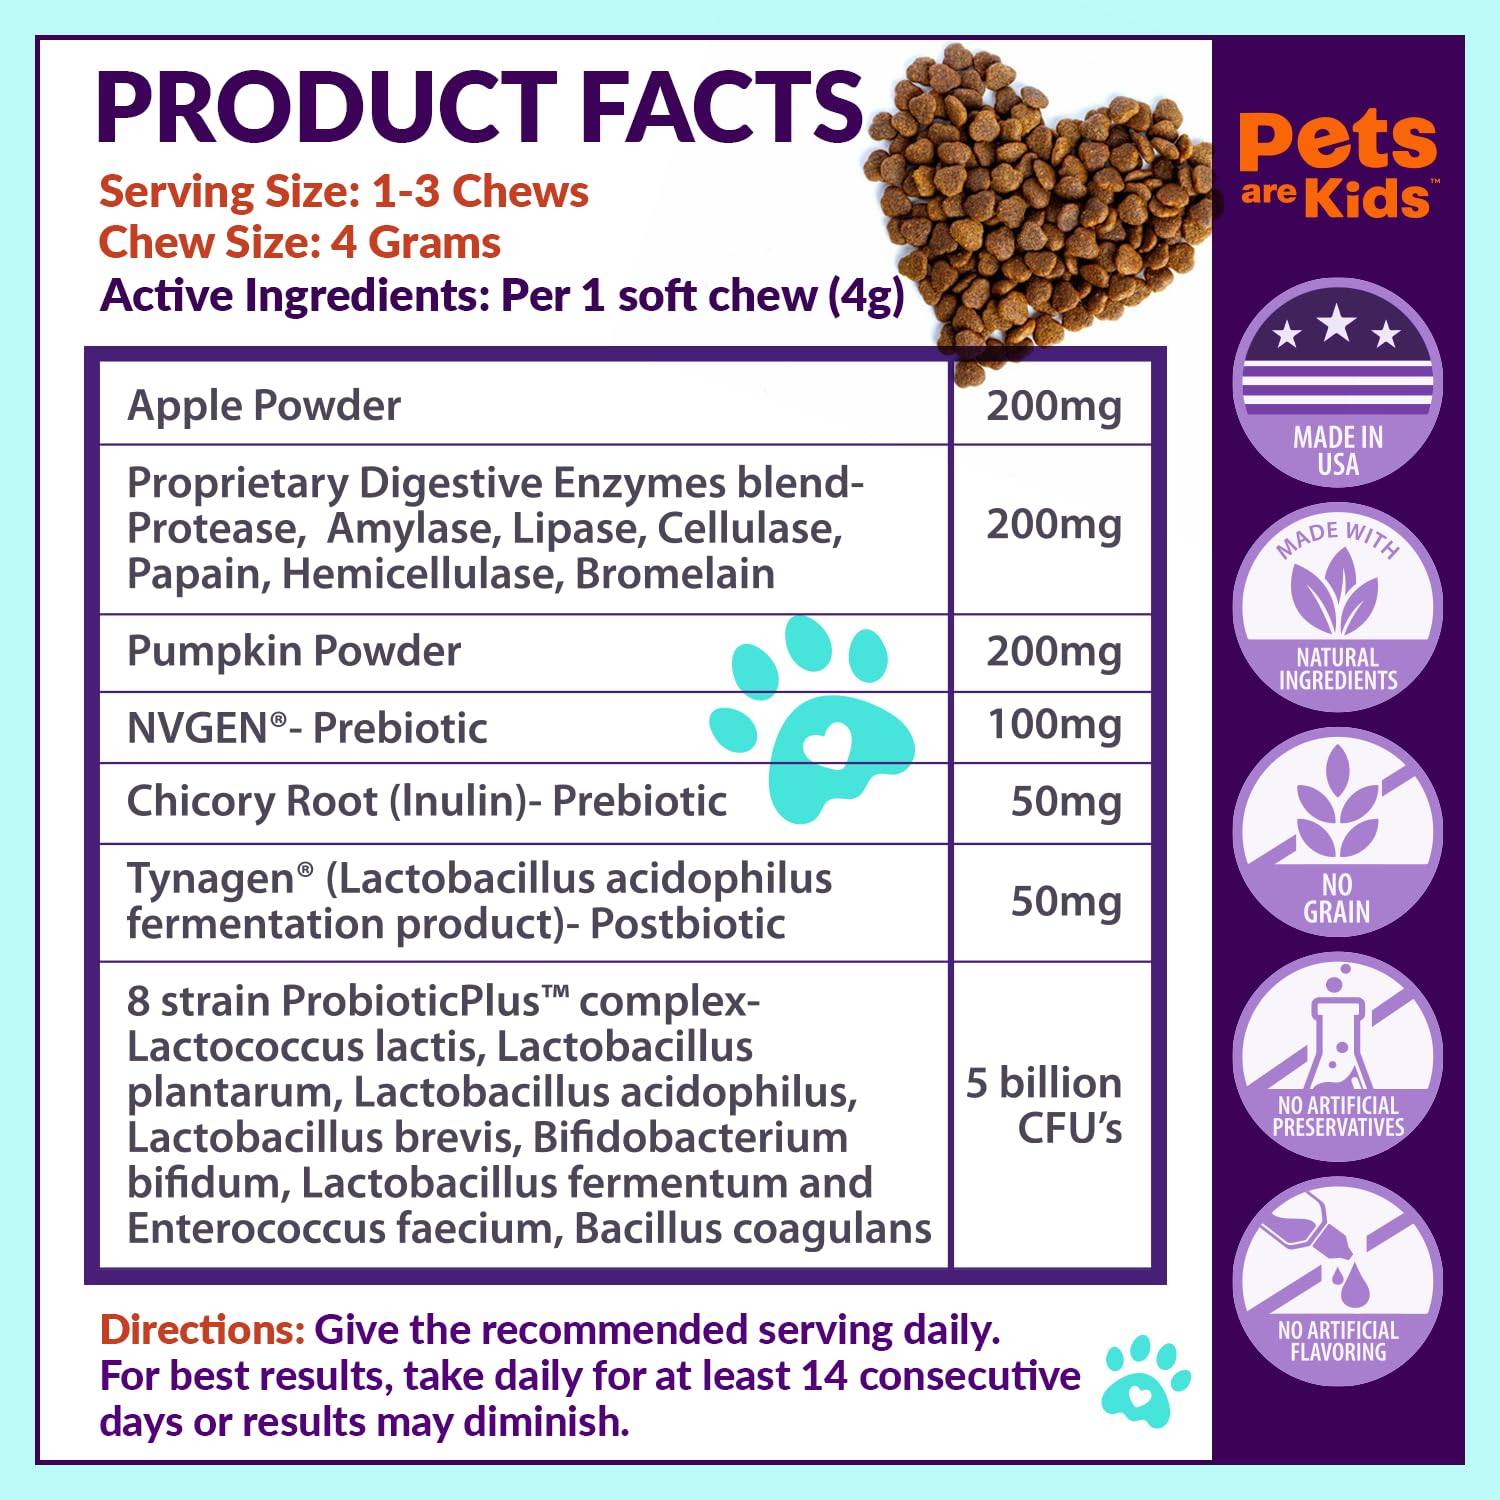 Product facts